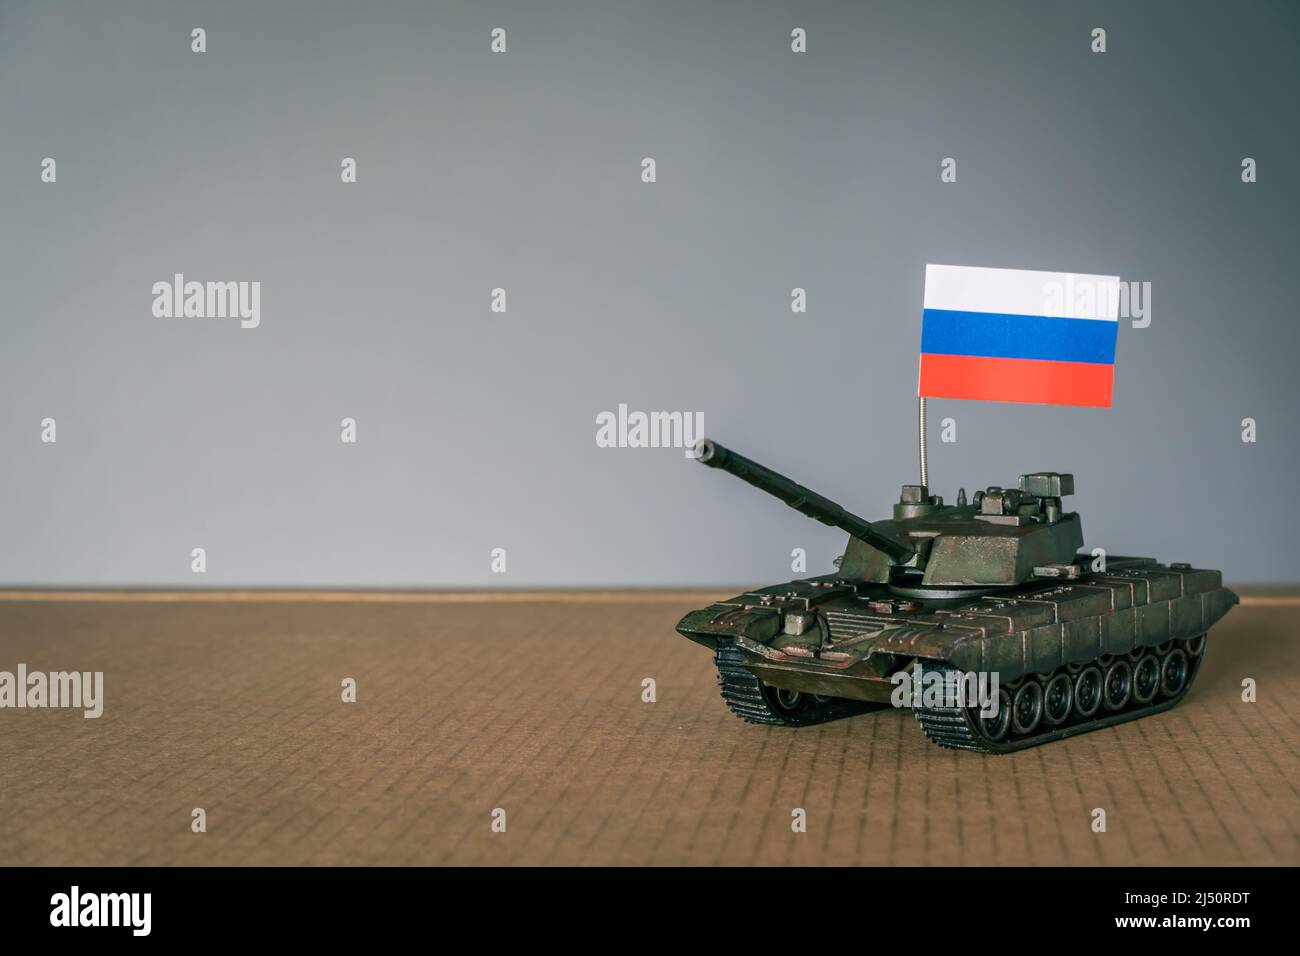 Toy tanks with Russian flag Stock Photo